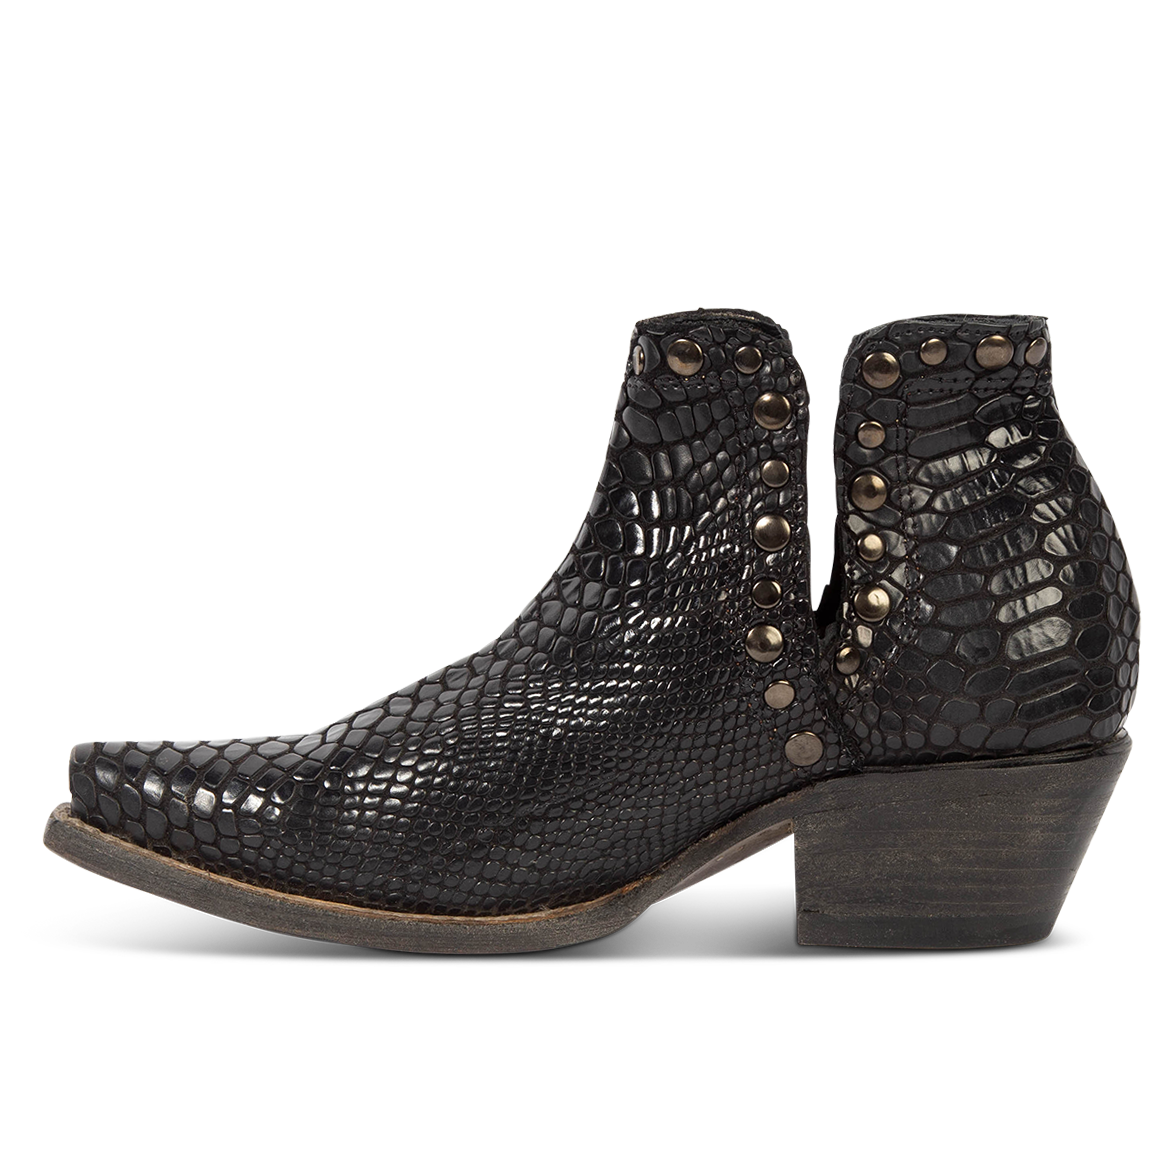 Inside view showing exposed ankle cutouts, studded detailing and snip toe construction on FREEBIRD women's Mandy black embossed leather ankle bootie